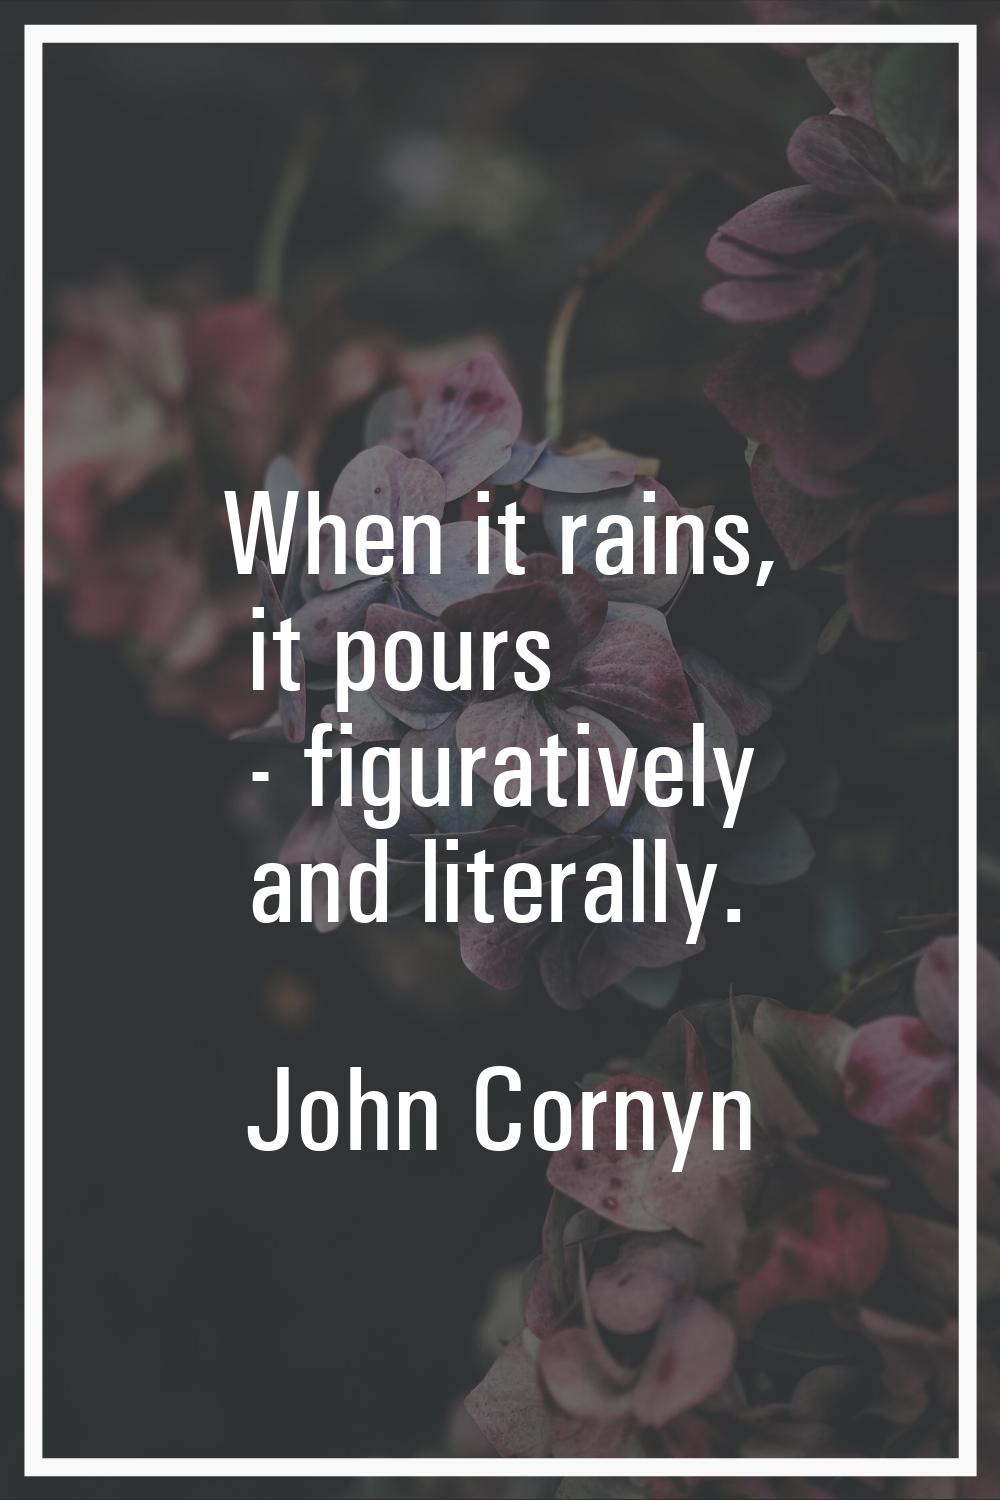 When it rains, it pours - figuratively and literally.